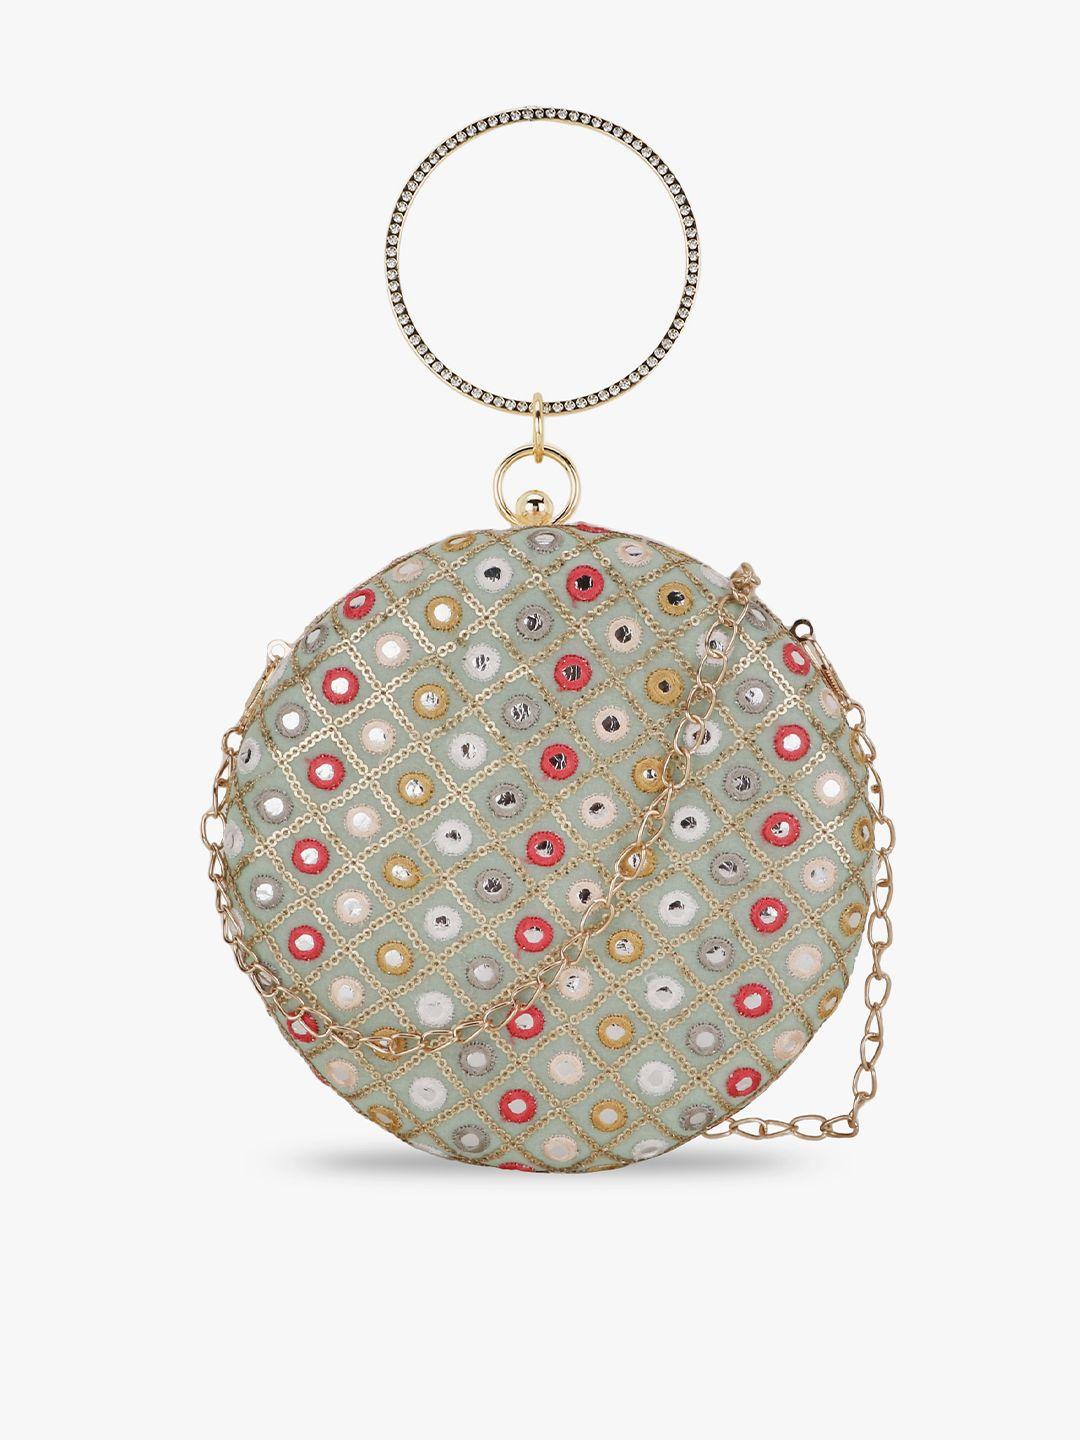 anekaant green & red embellished buckle detail purse clutch